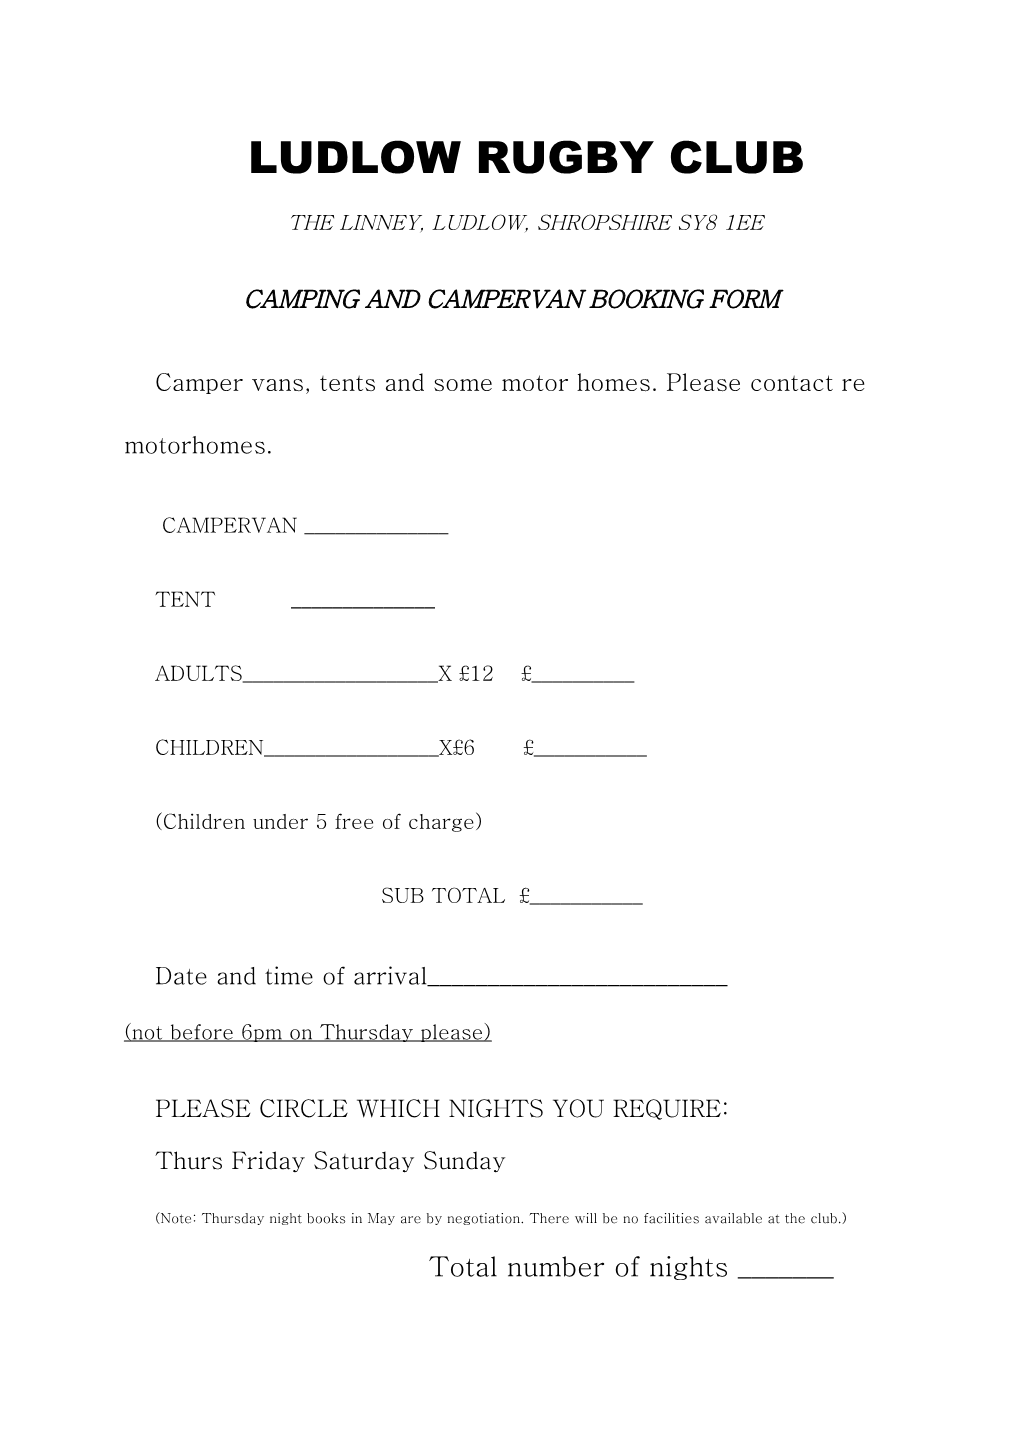 Camping and Campervan Booking Form